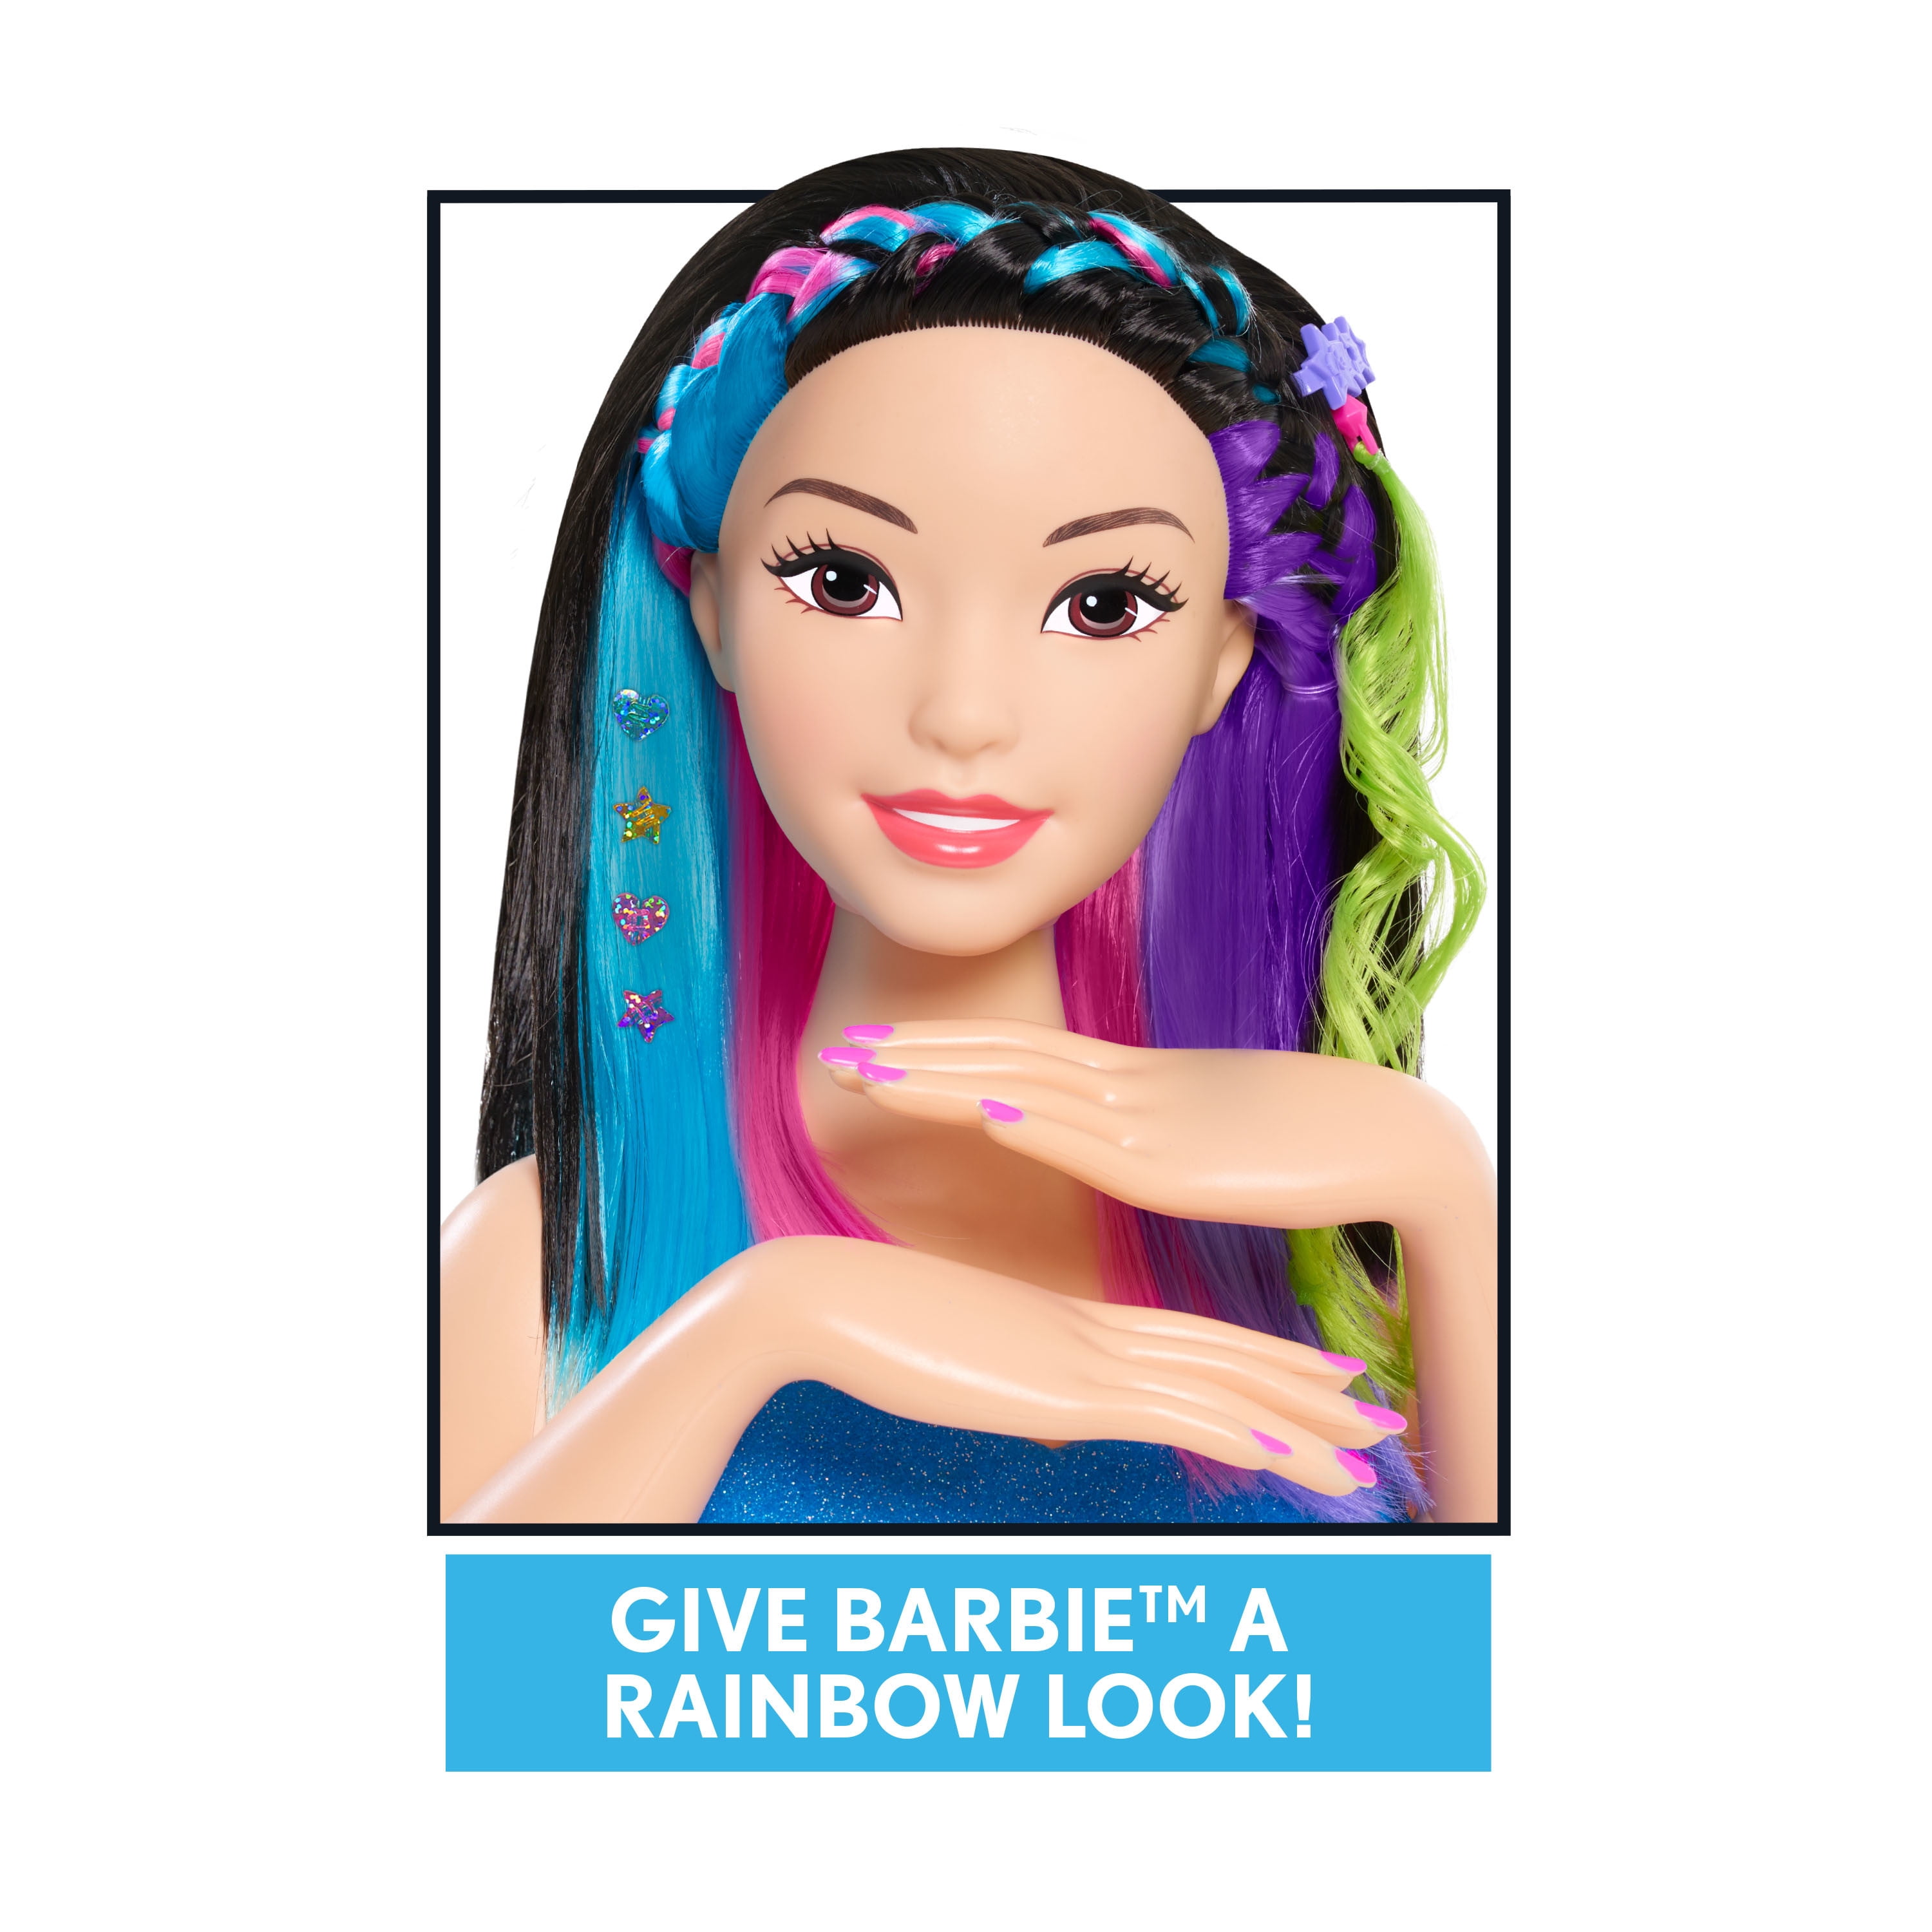 Barbie Rainbow Sparkle Deluxe Styling Head, Black Hair, Kids Toys for Ages  3 Up, Gifts and Presents 